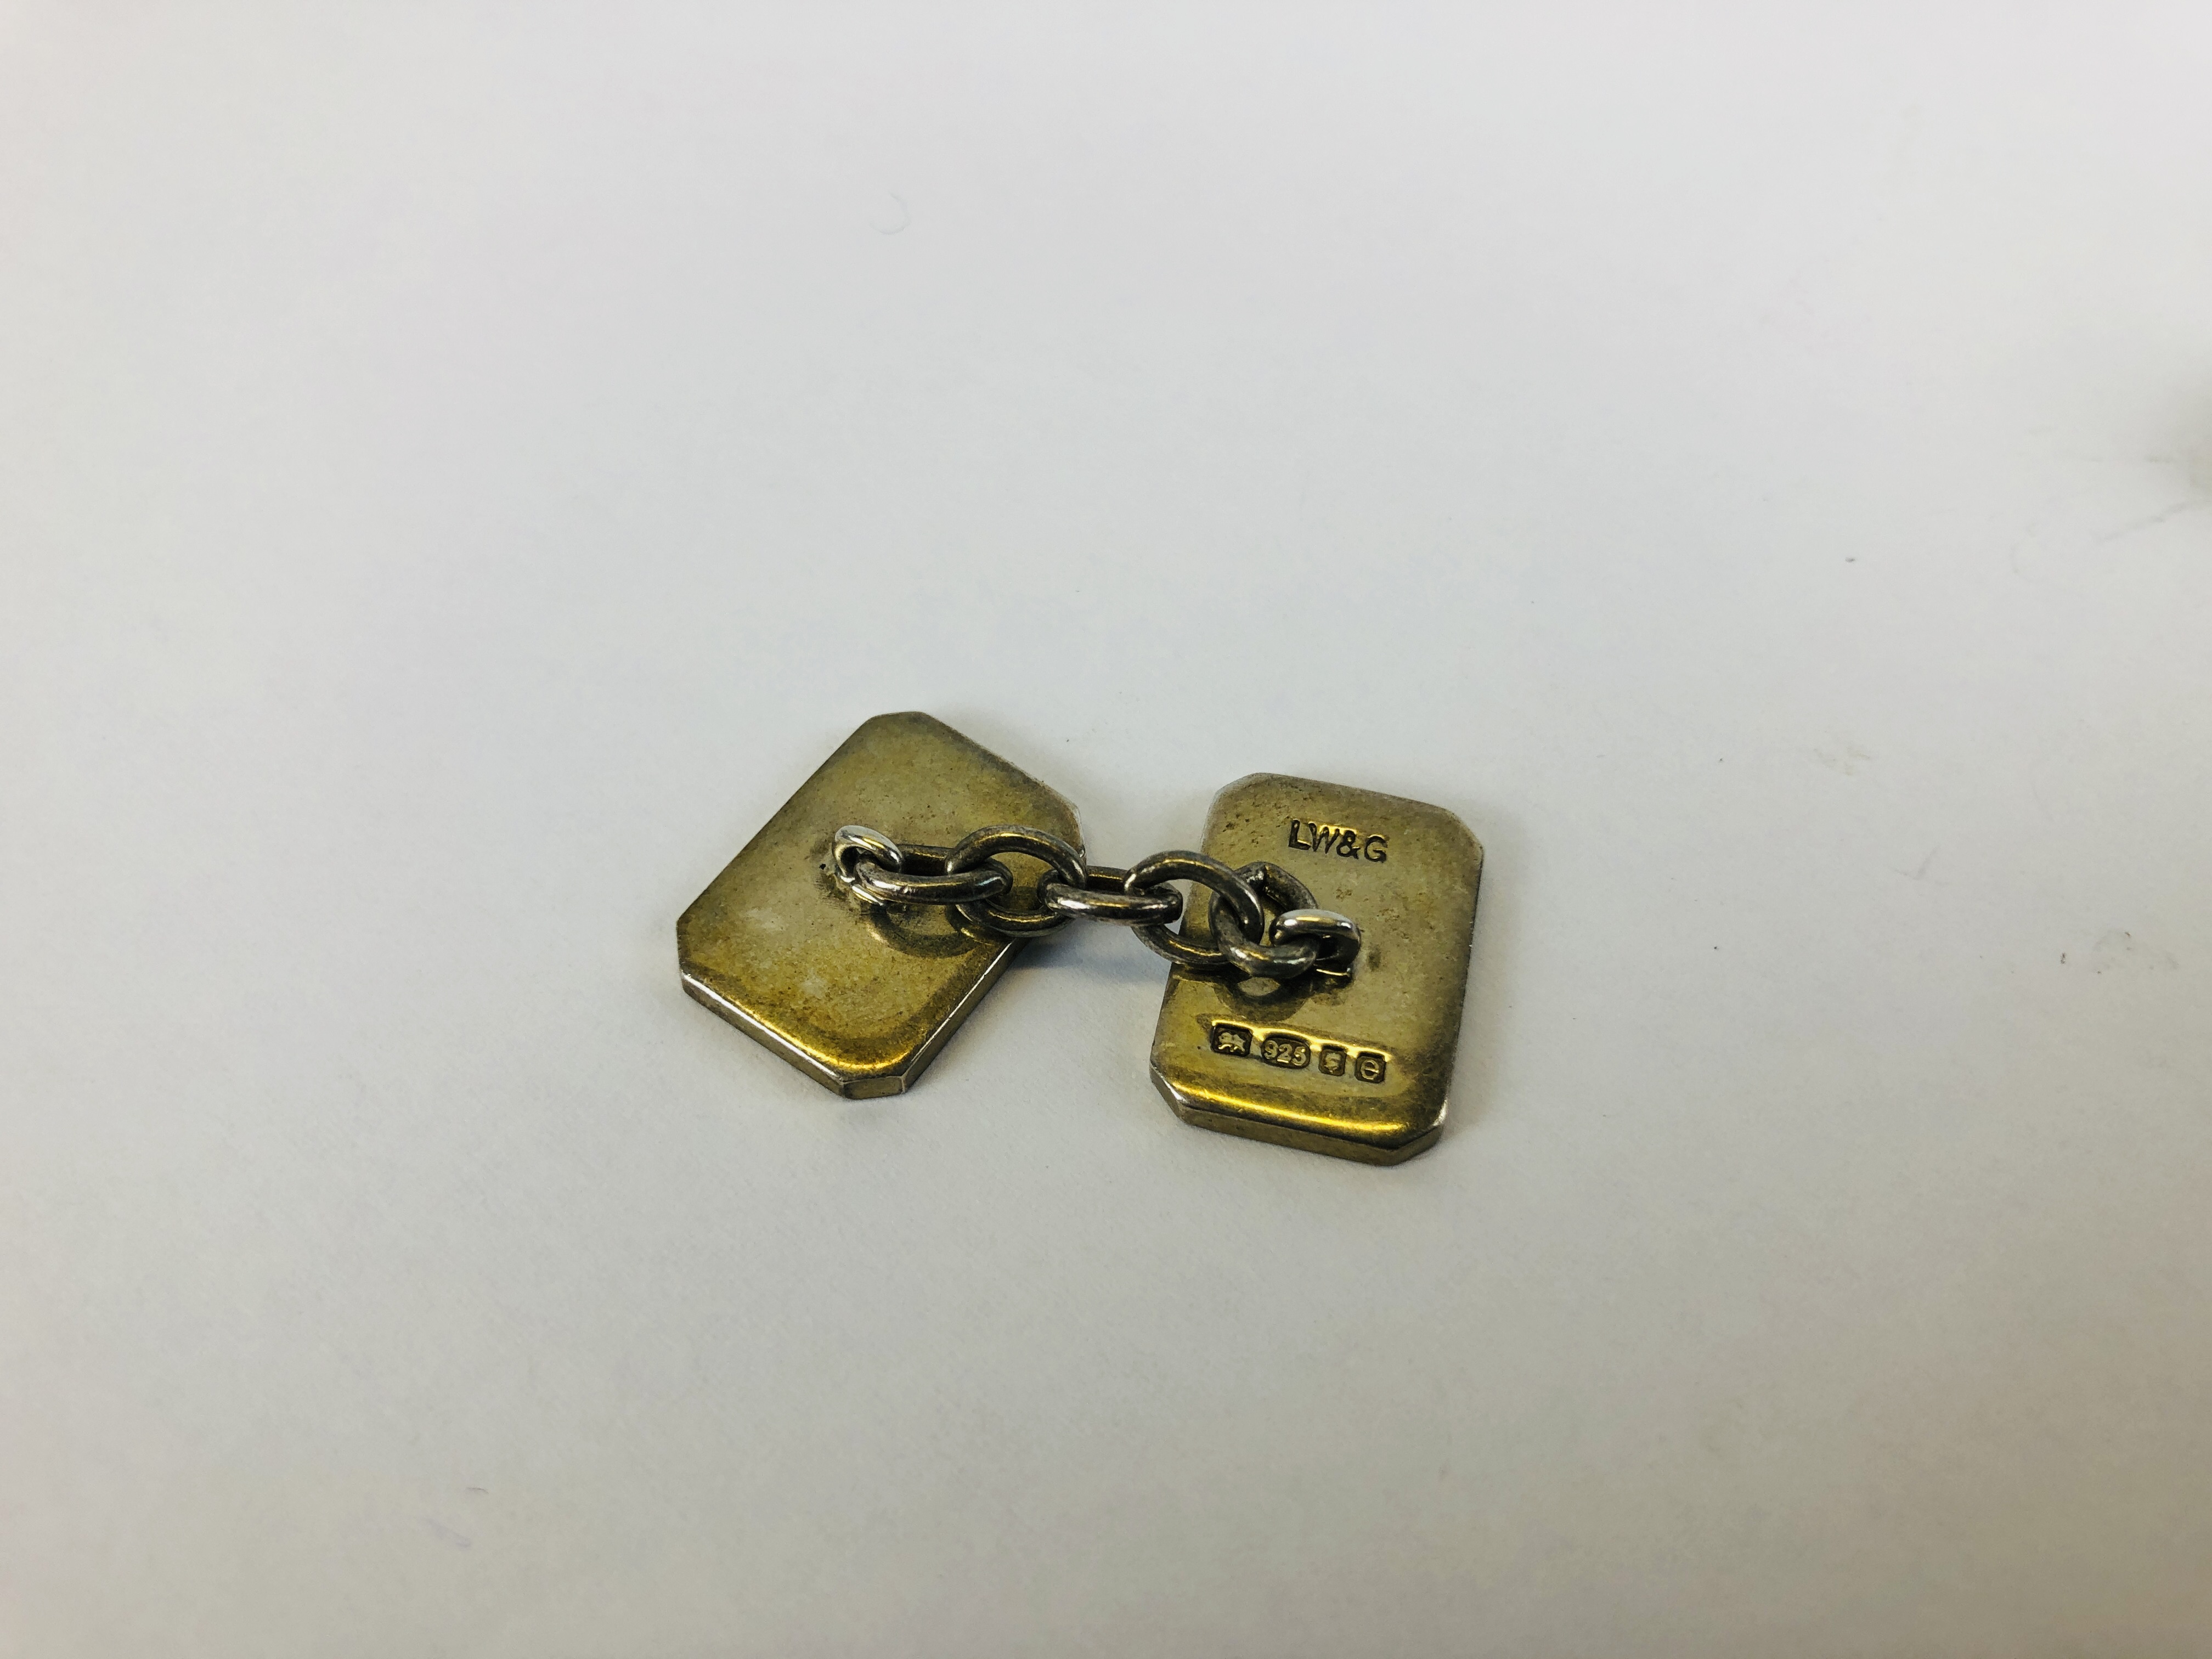 A PAIR OF VINTAGE SILVER CUFFLINKS - Image 3 of 6